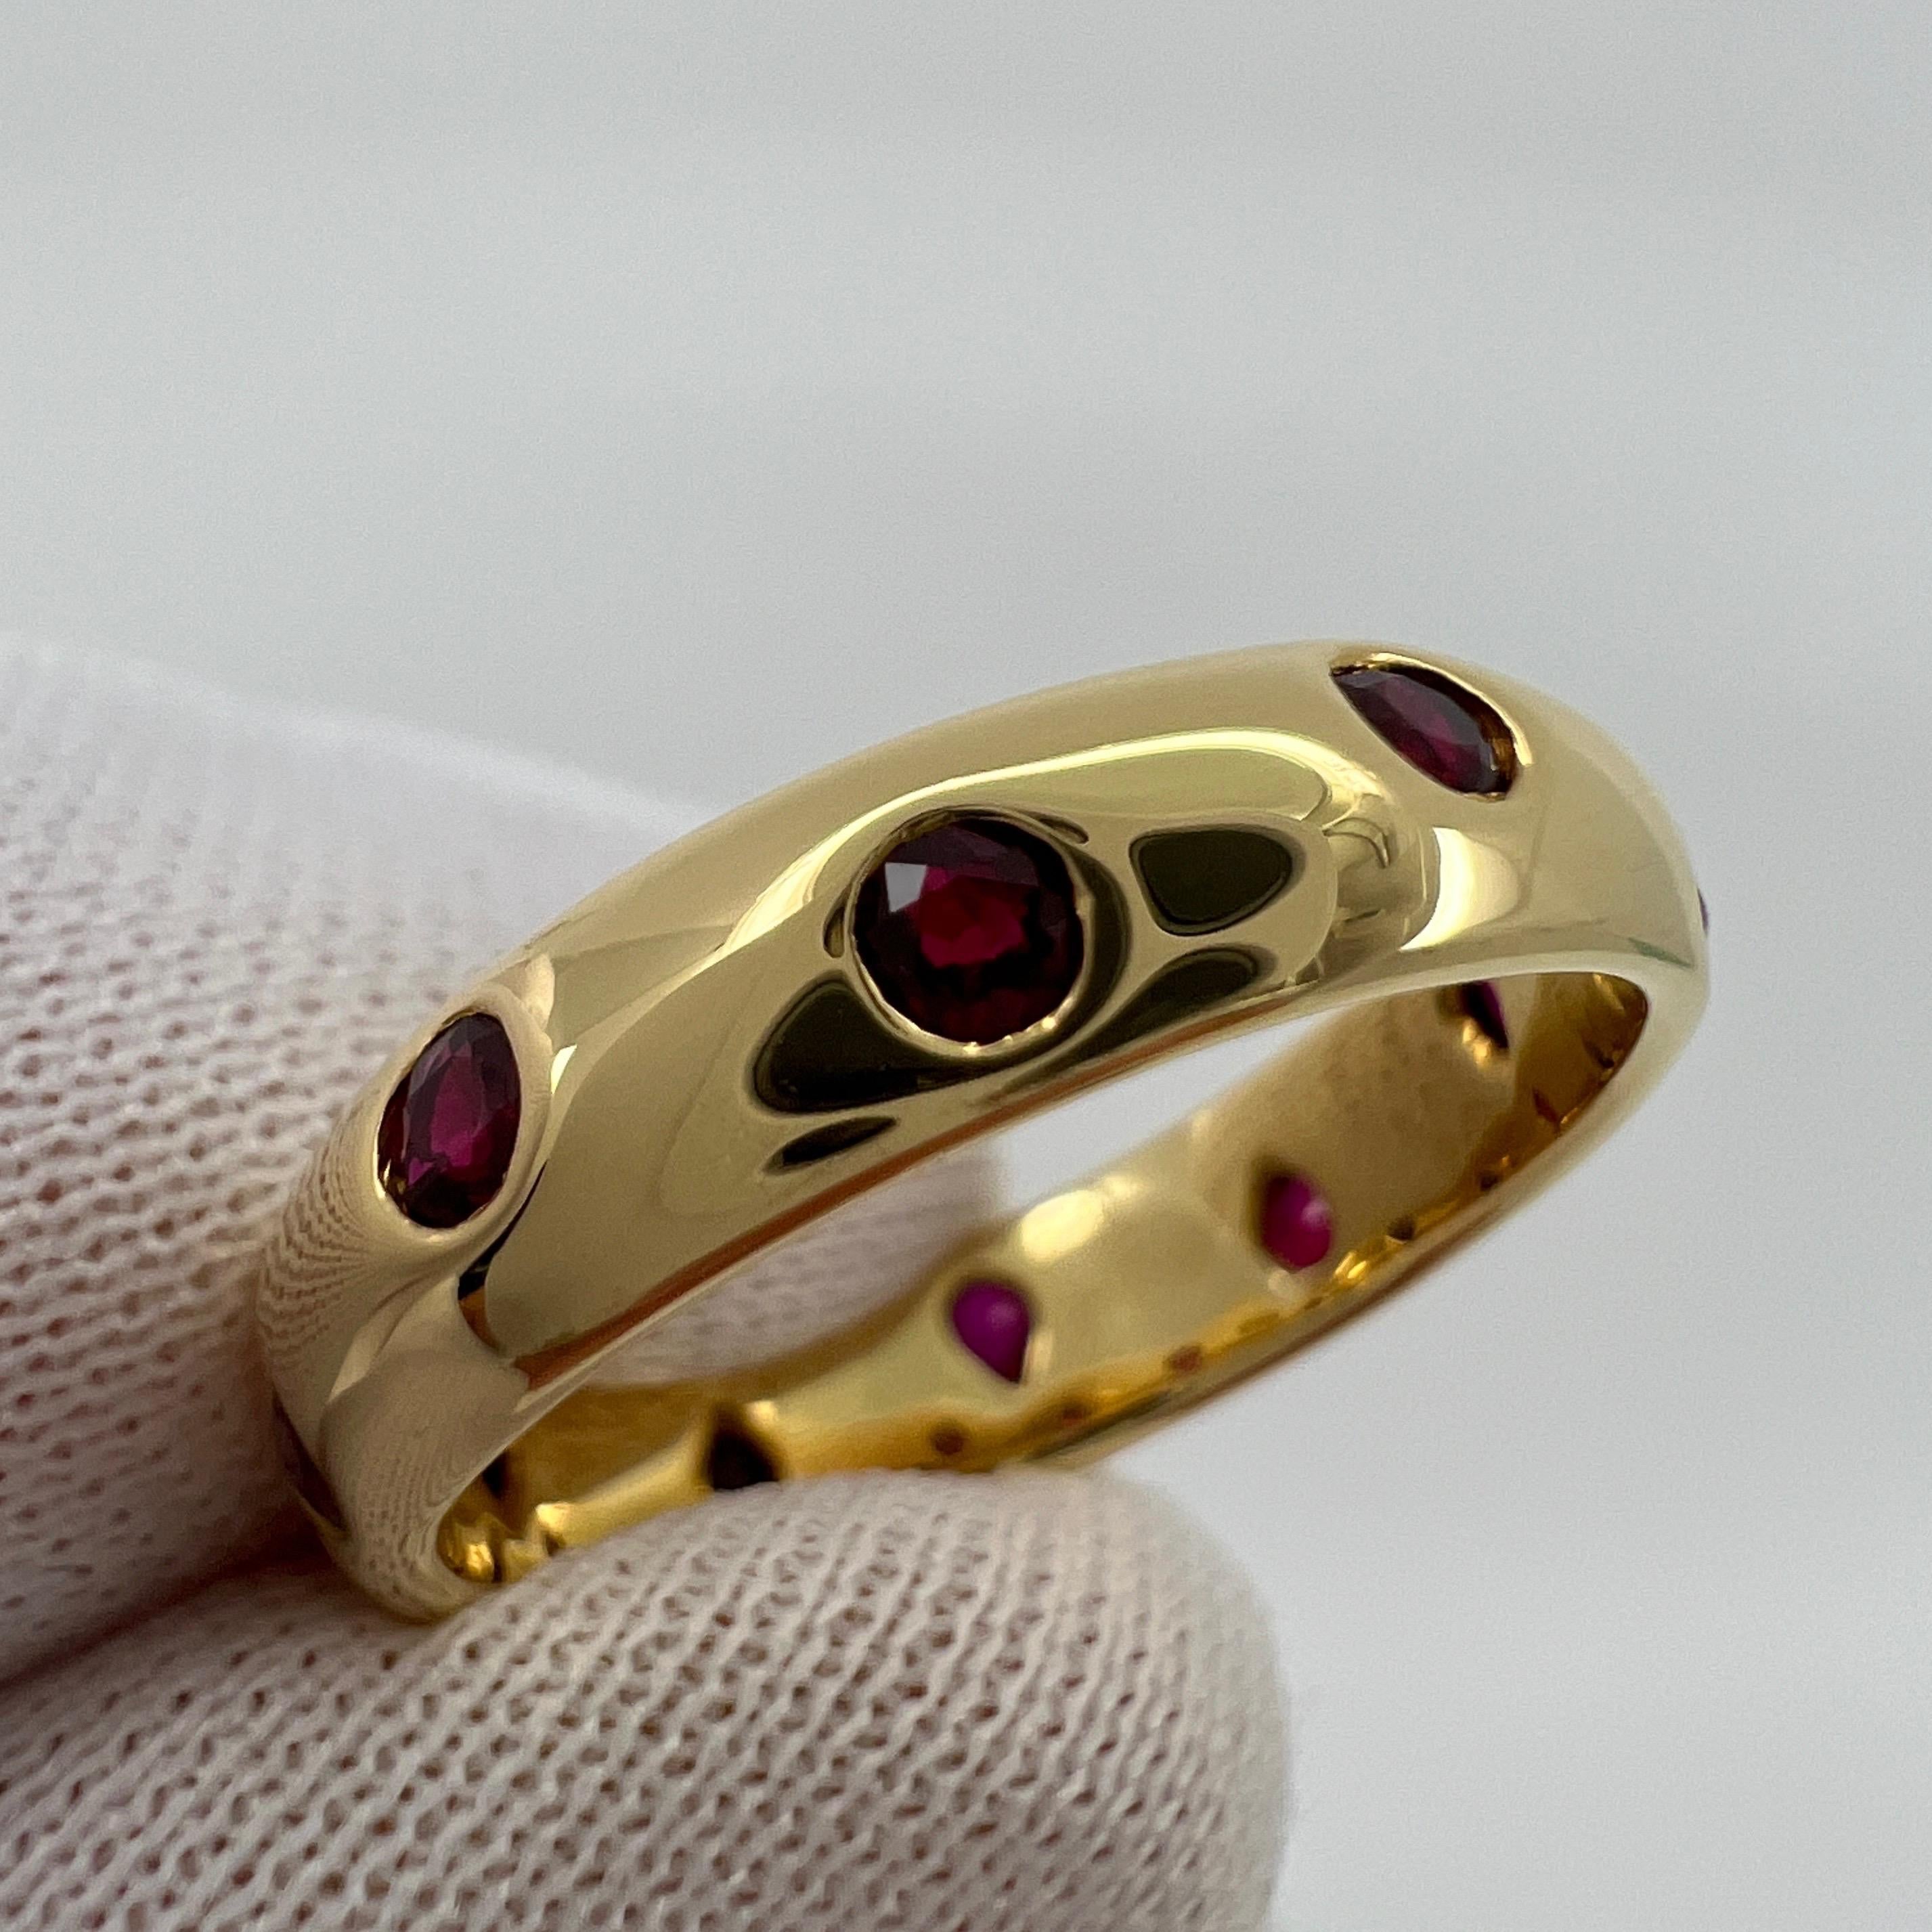 Women's or Men's Vintage Rare Tiffany & Co. Fine Red Ruby 18k Yellow Gold Etoile Band Ring